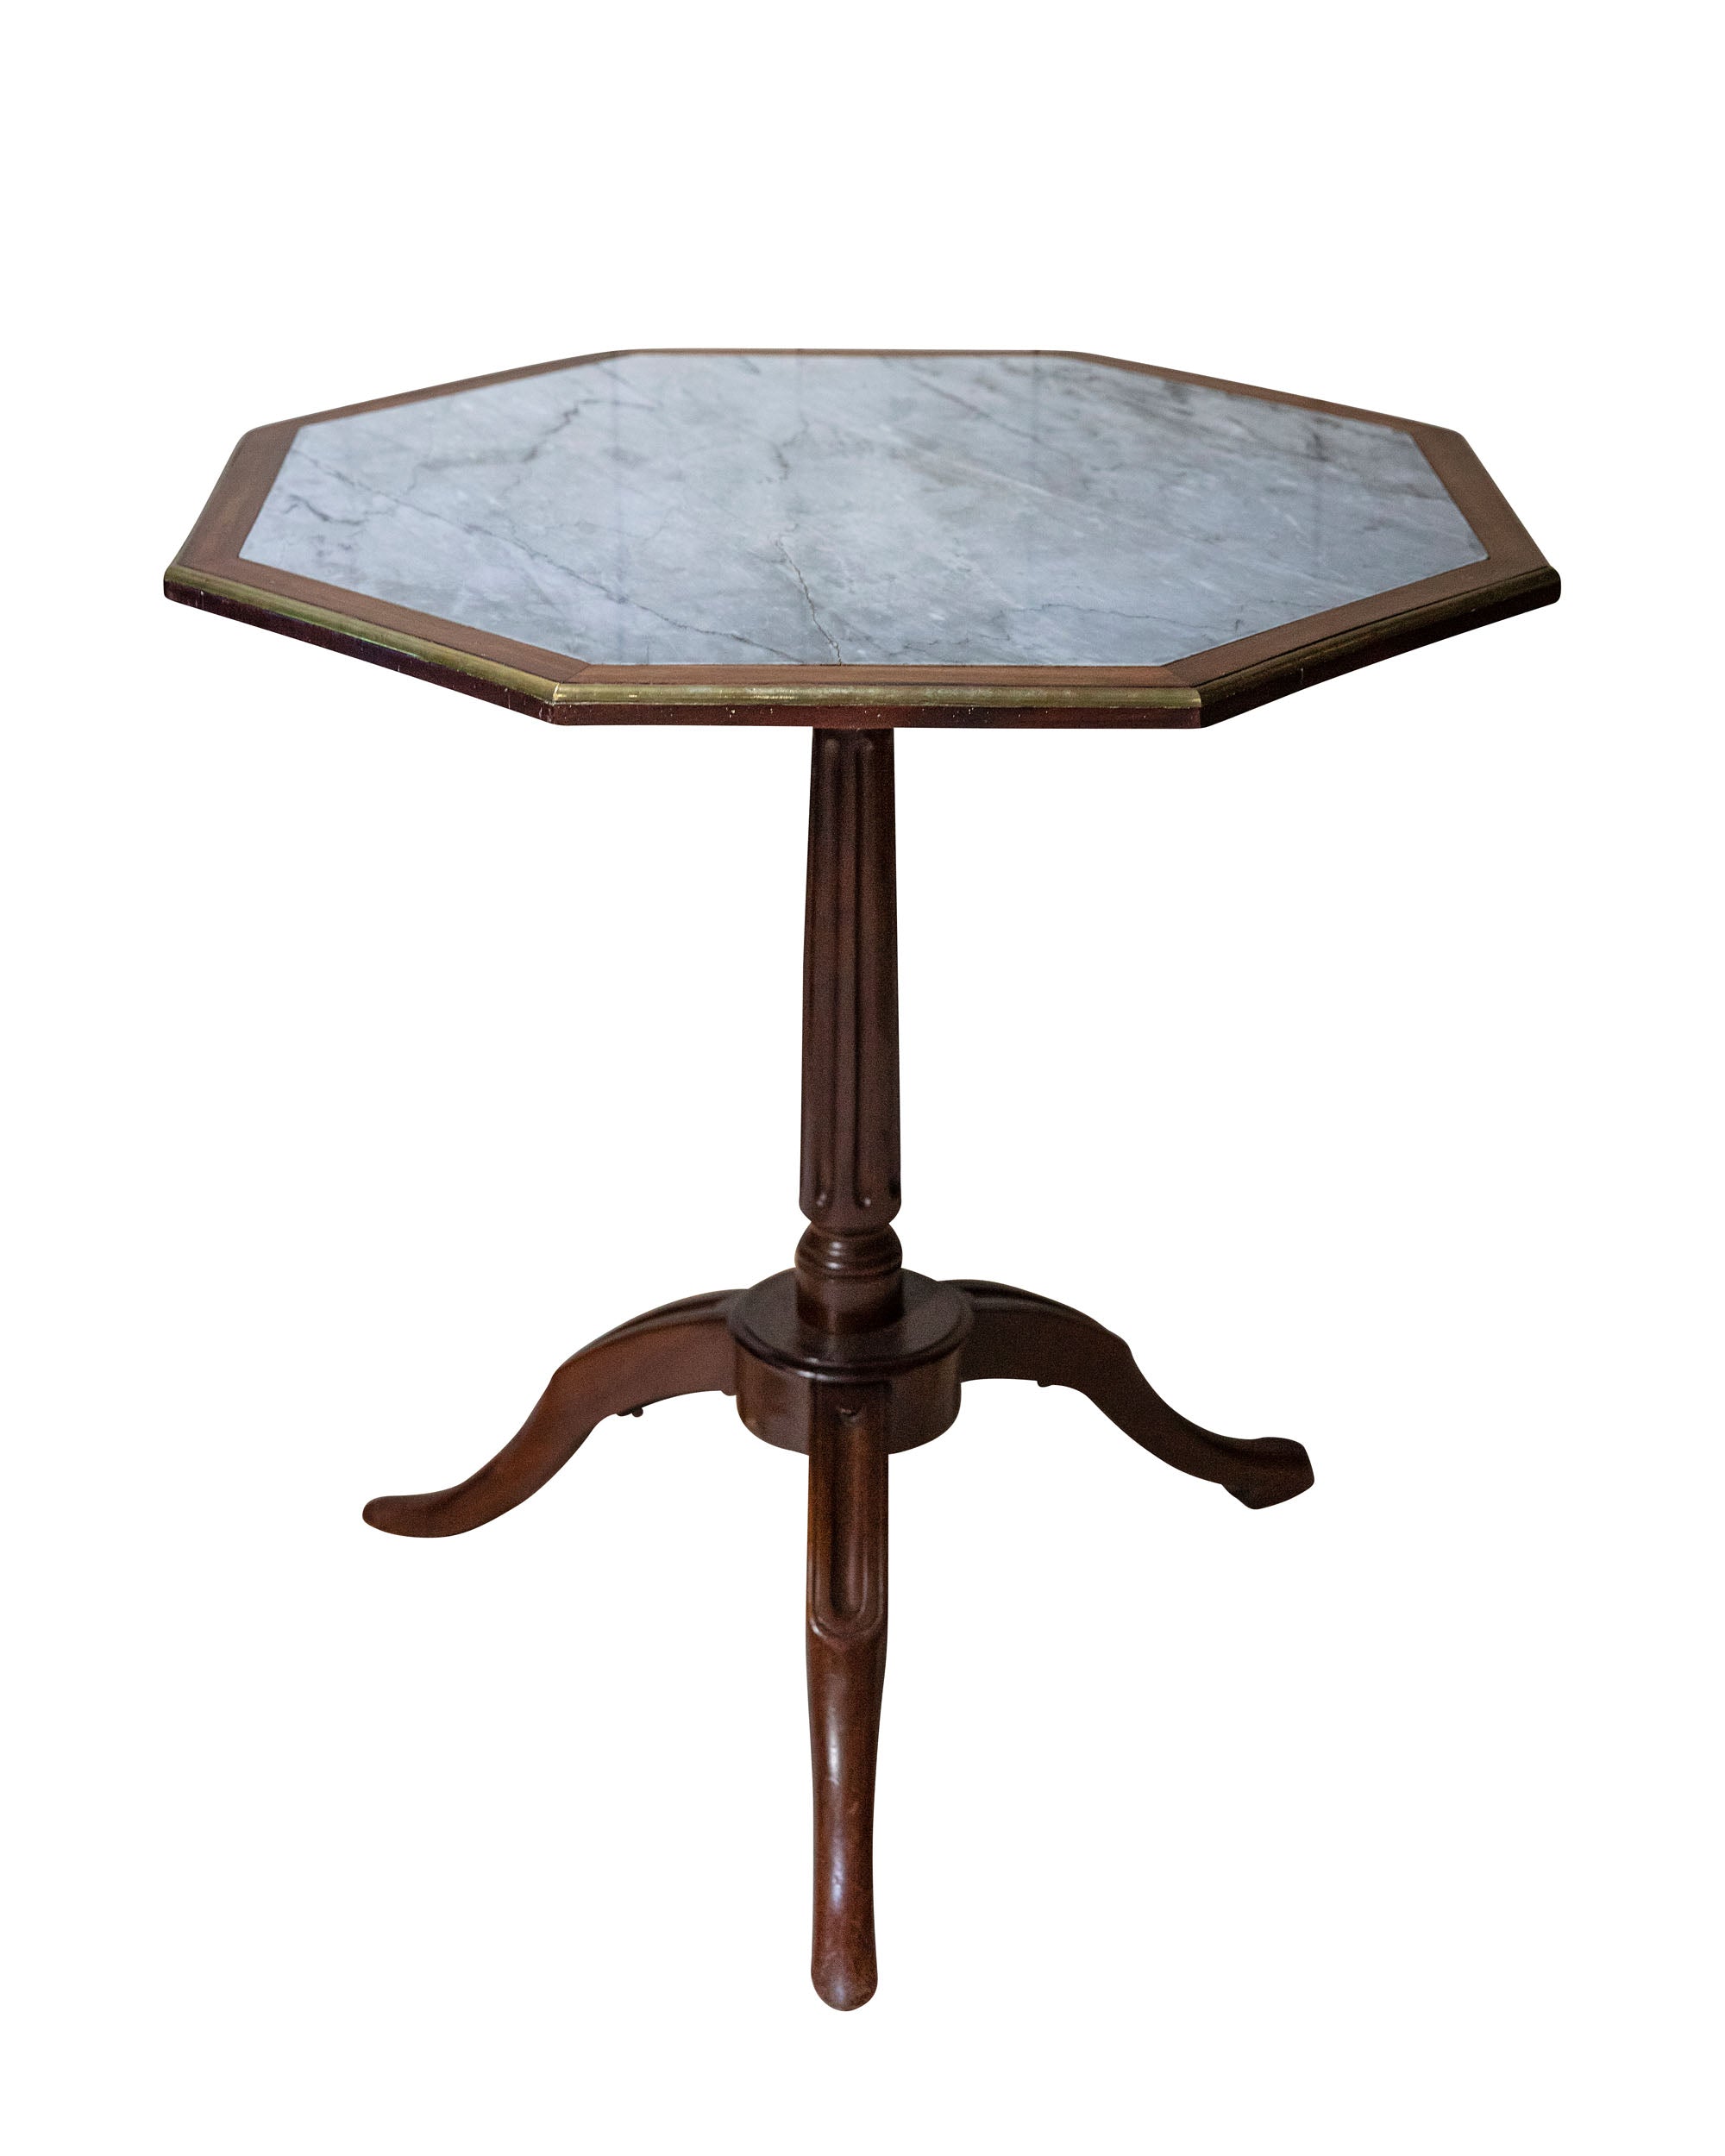 Foldable octagonal Gueridon with marble top and mahogany wood structure with a brass edge